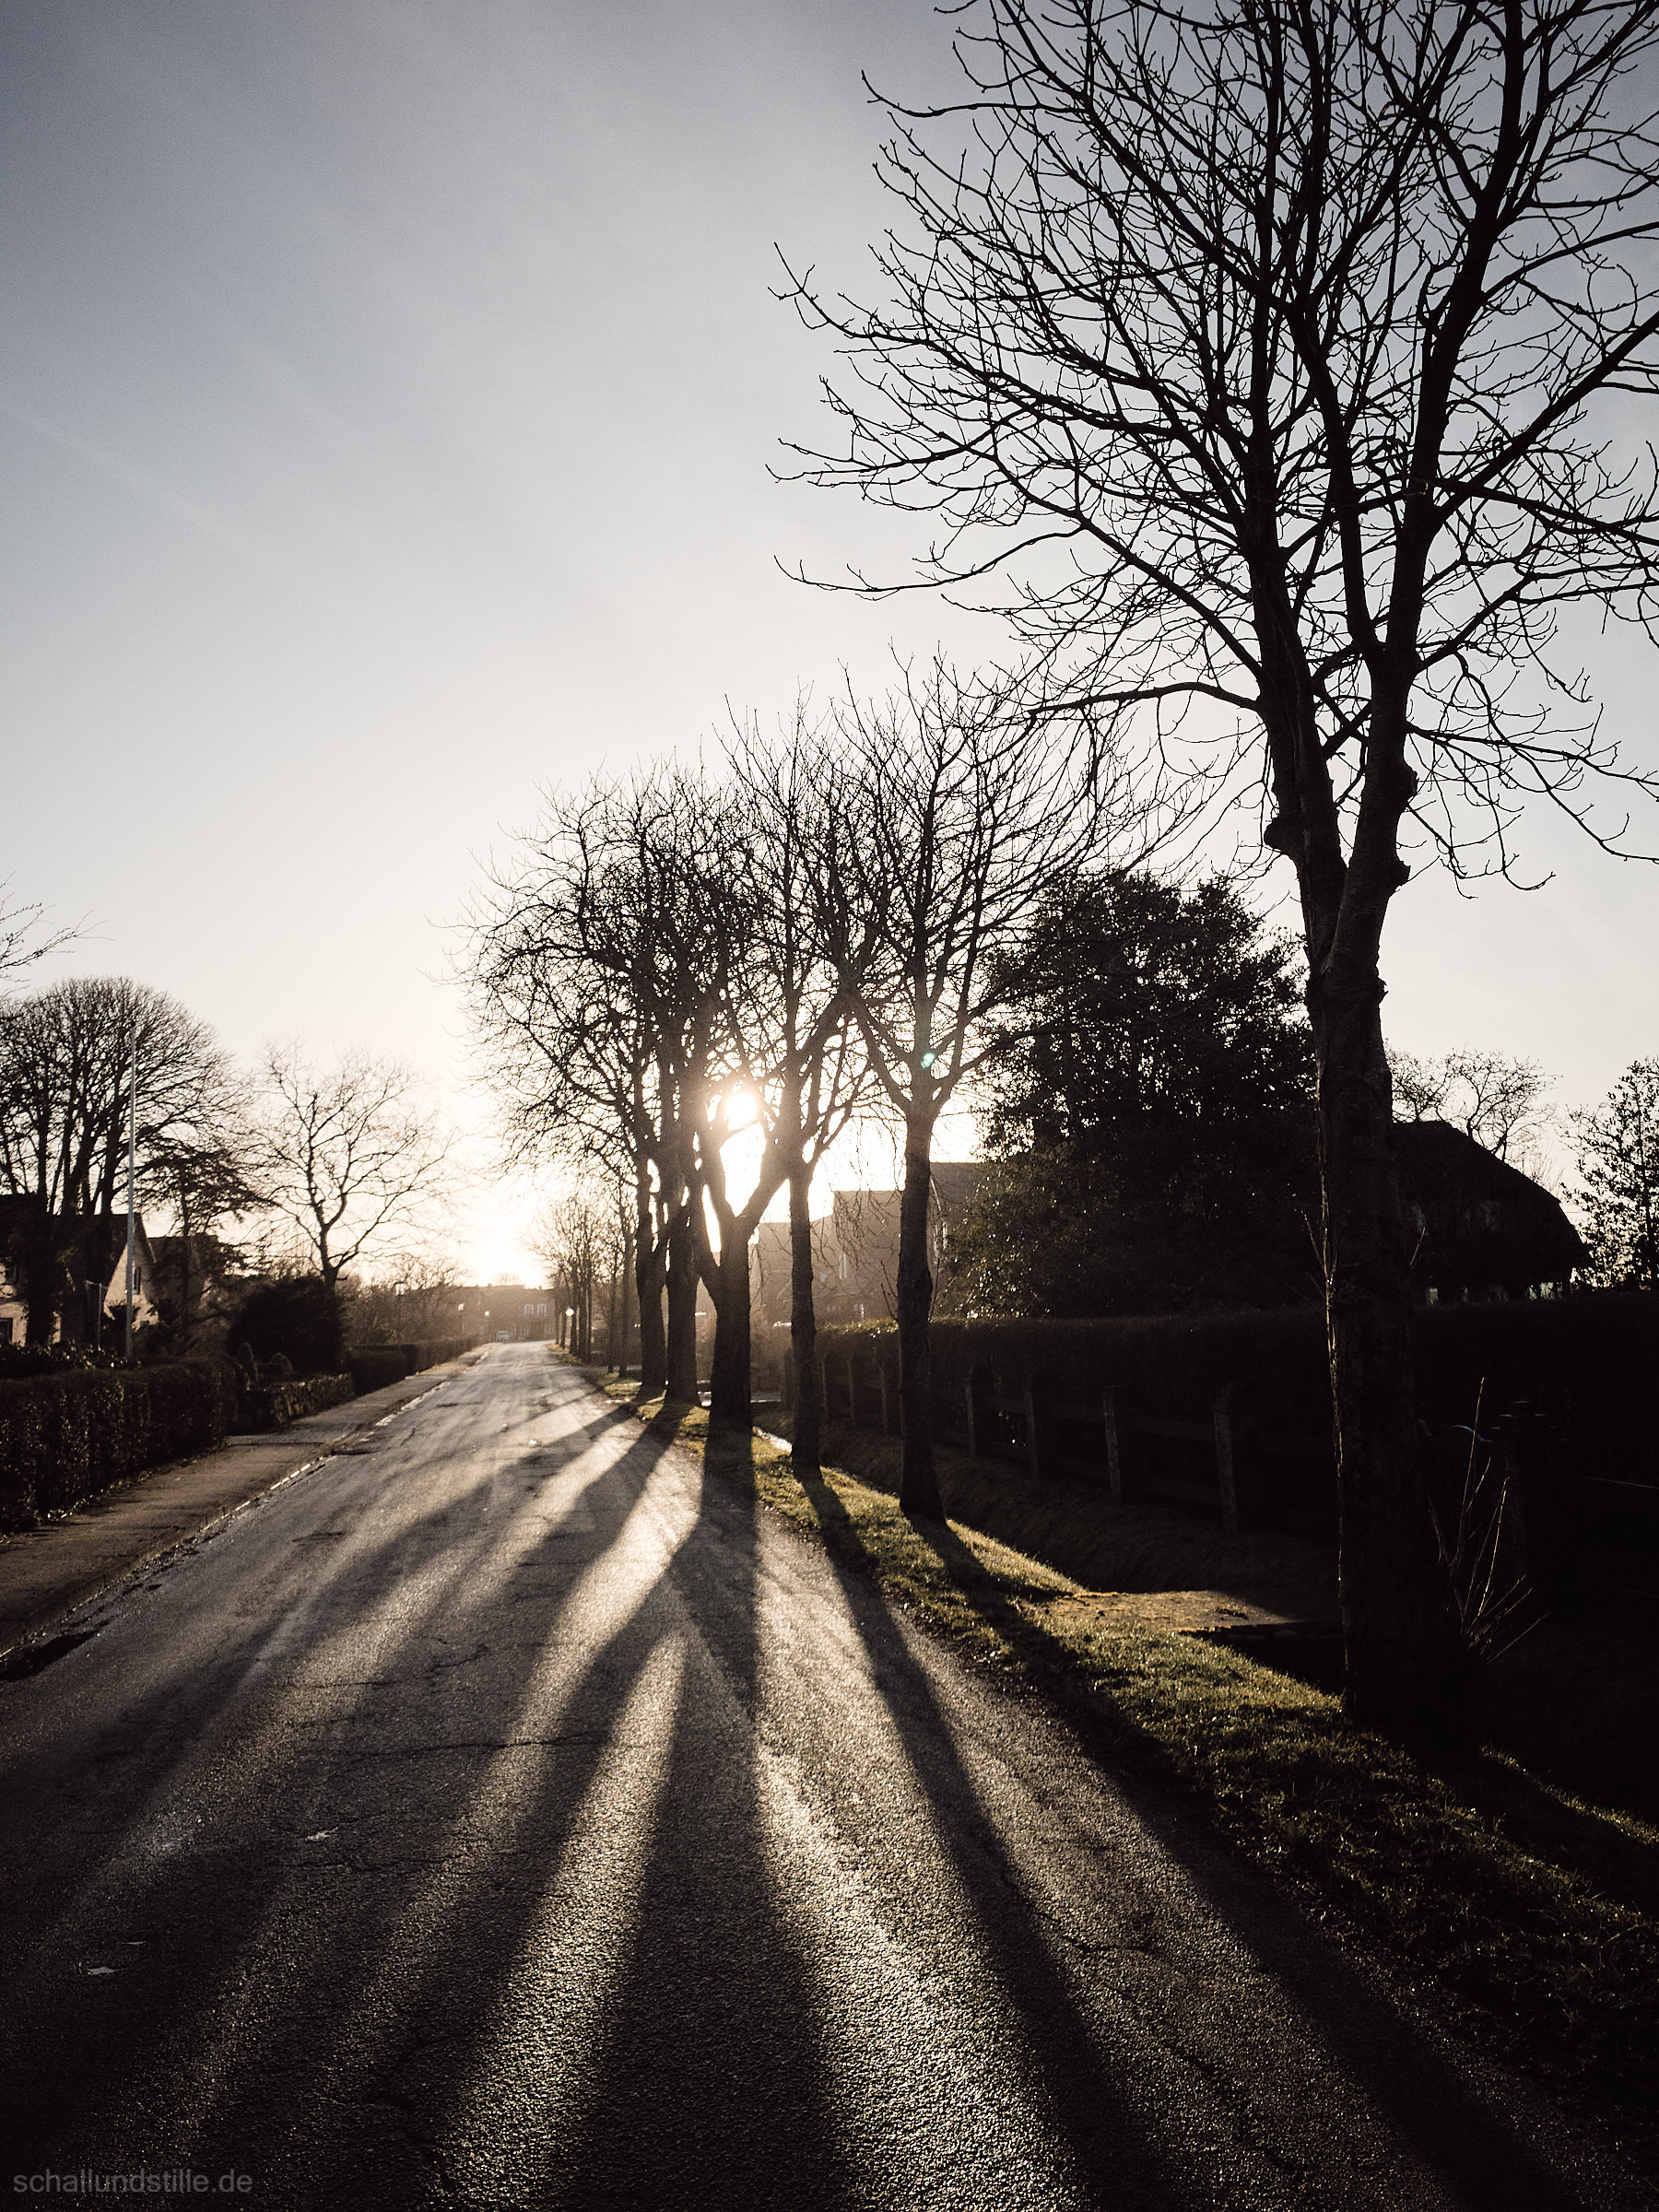 a village street in winter with sunlit silhouettes of trees at the side